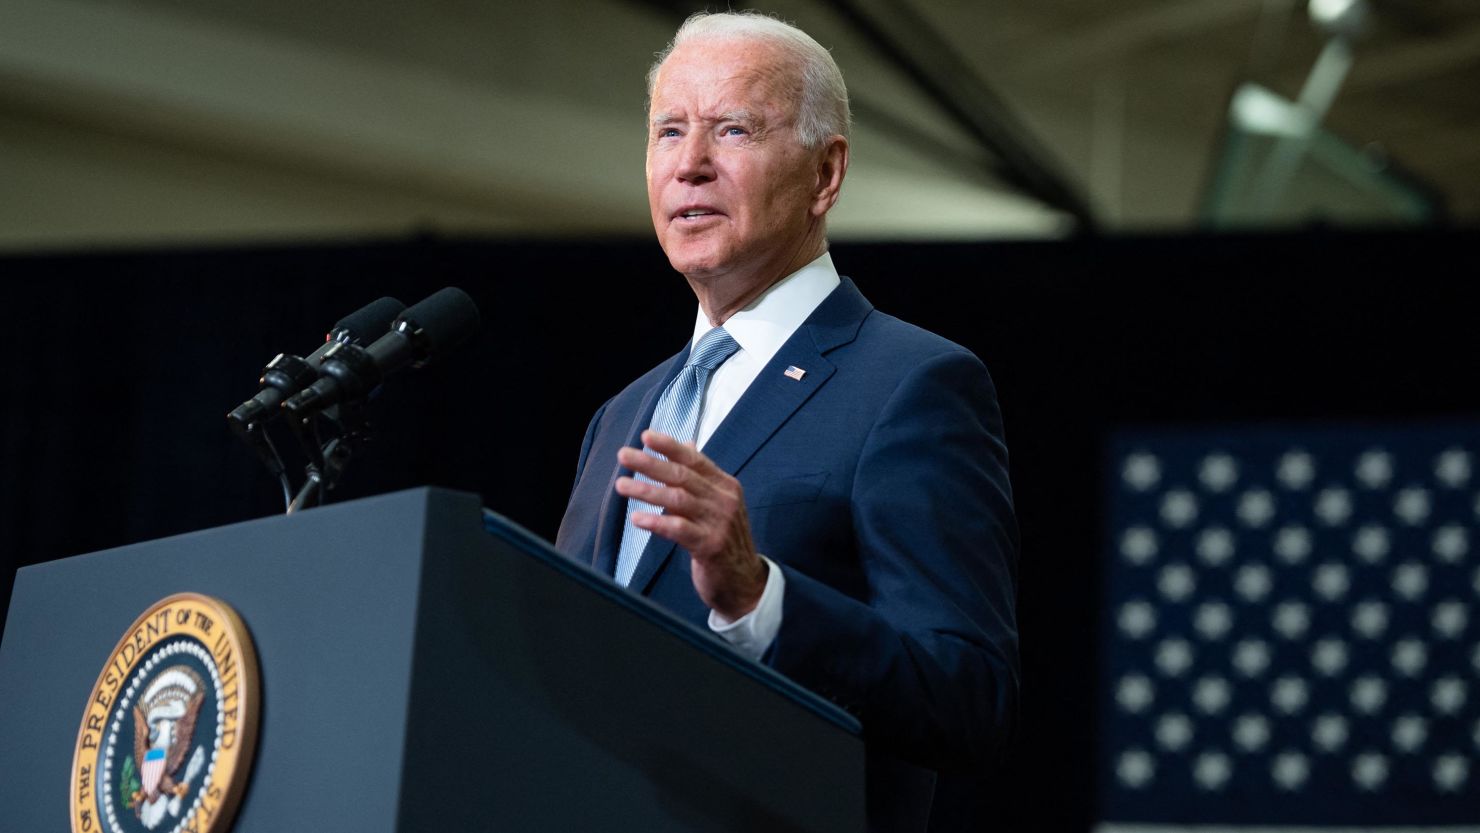 US President Joe Biden speaks about his Build Back Better economic plans after touring McHenry County College in Crystal Lake, Illinois, on Wednesday, July 7, 2021. 